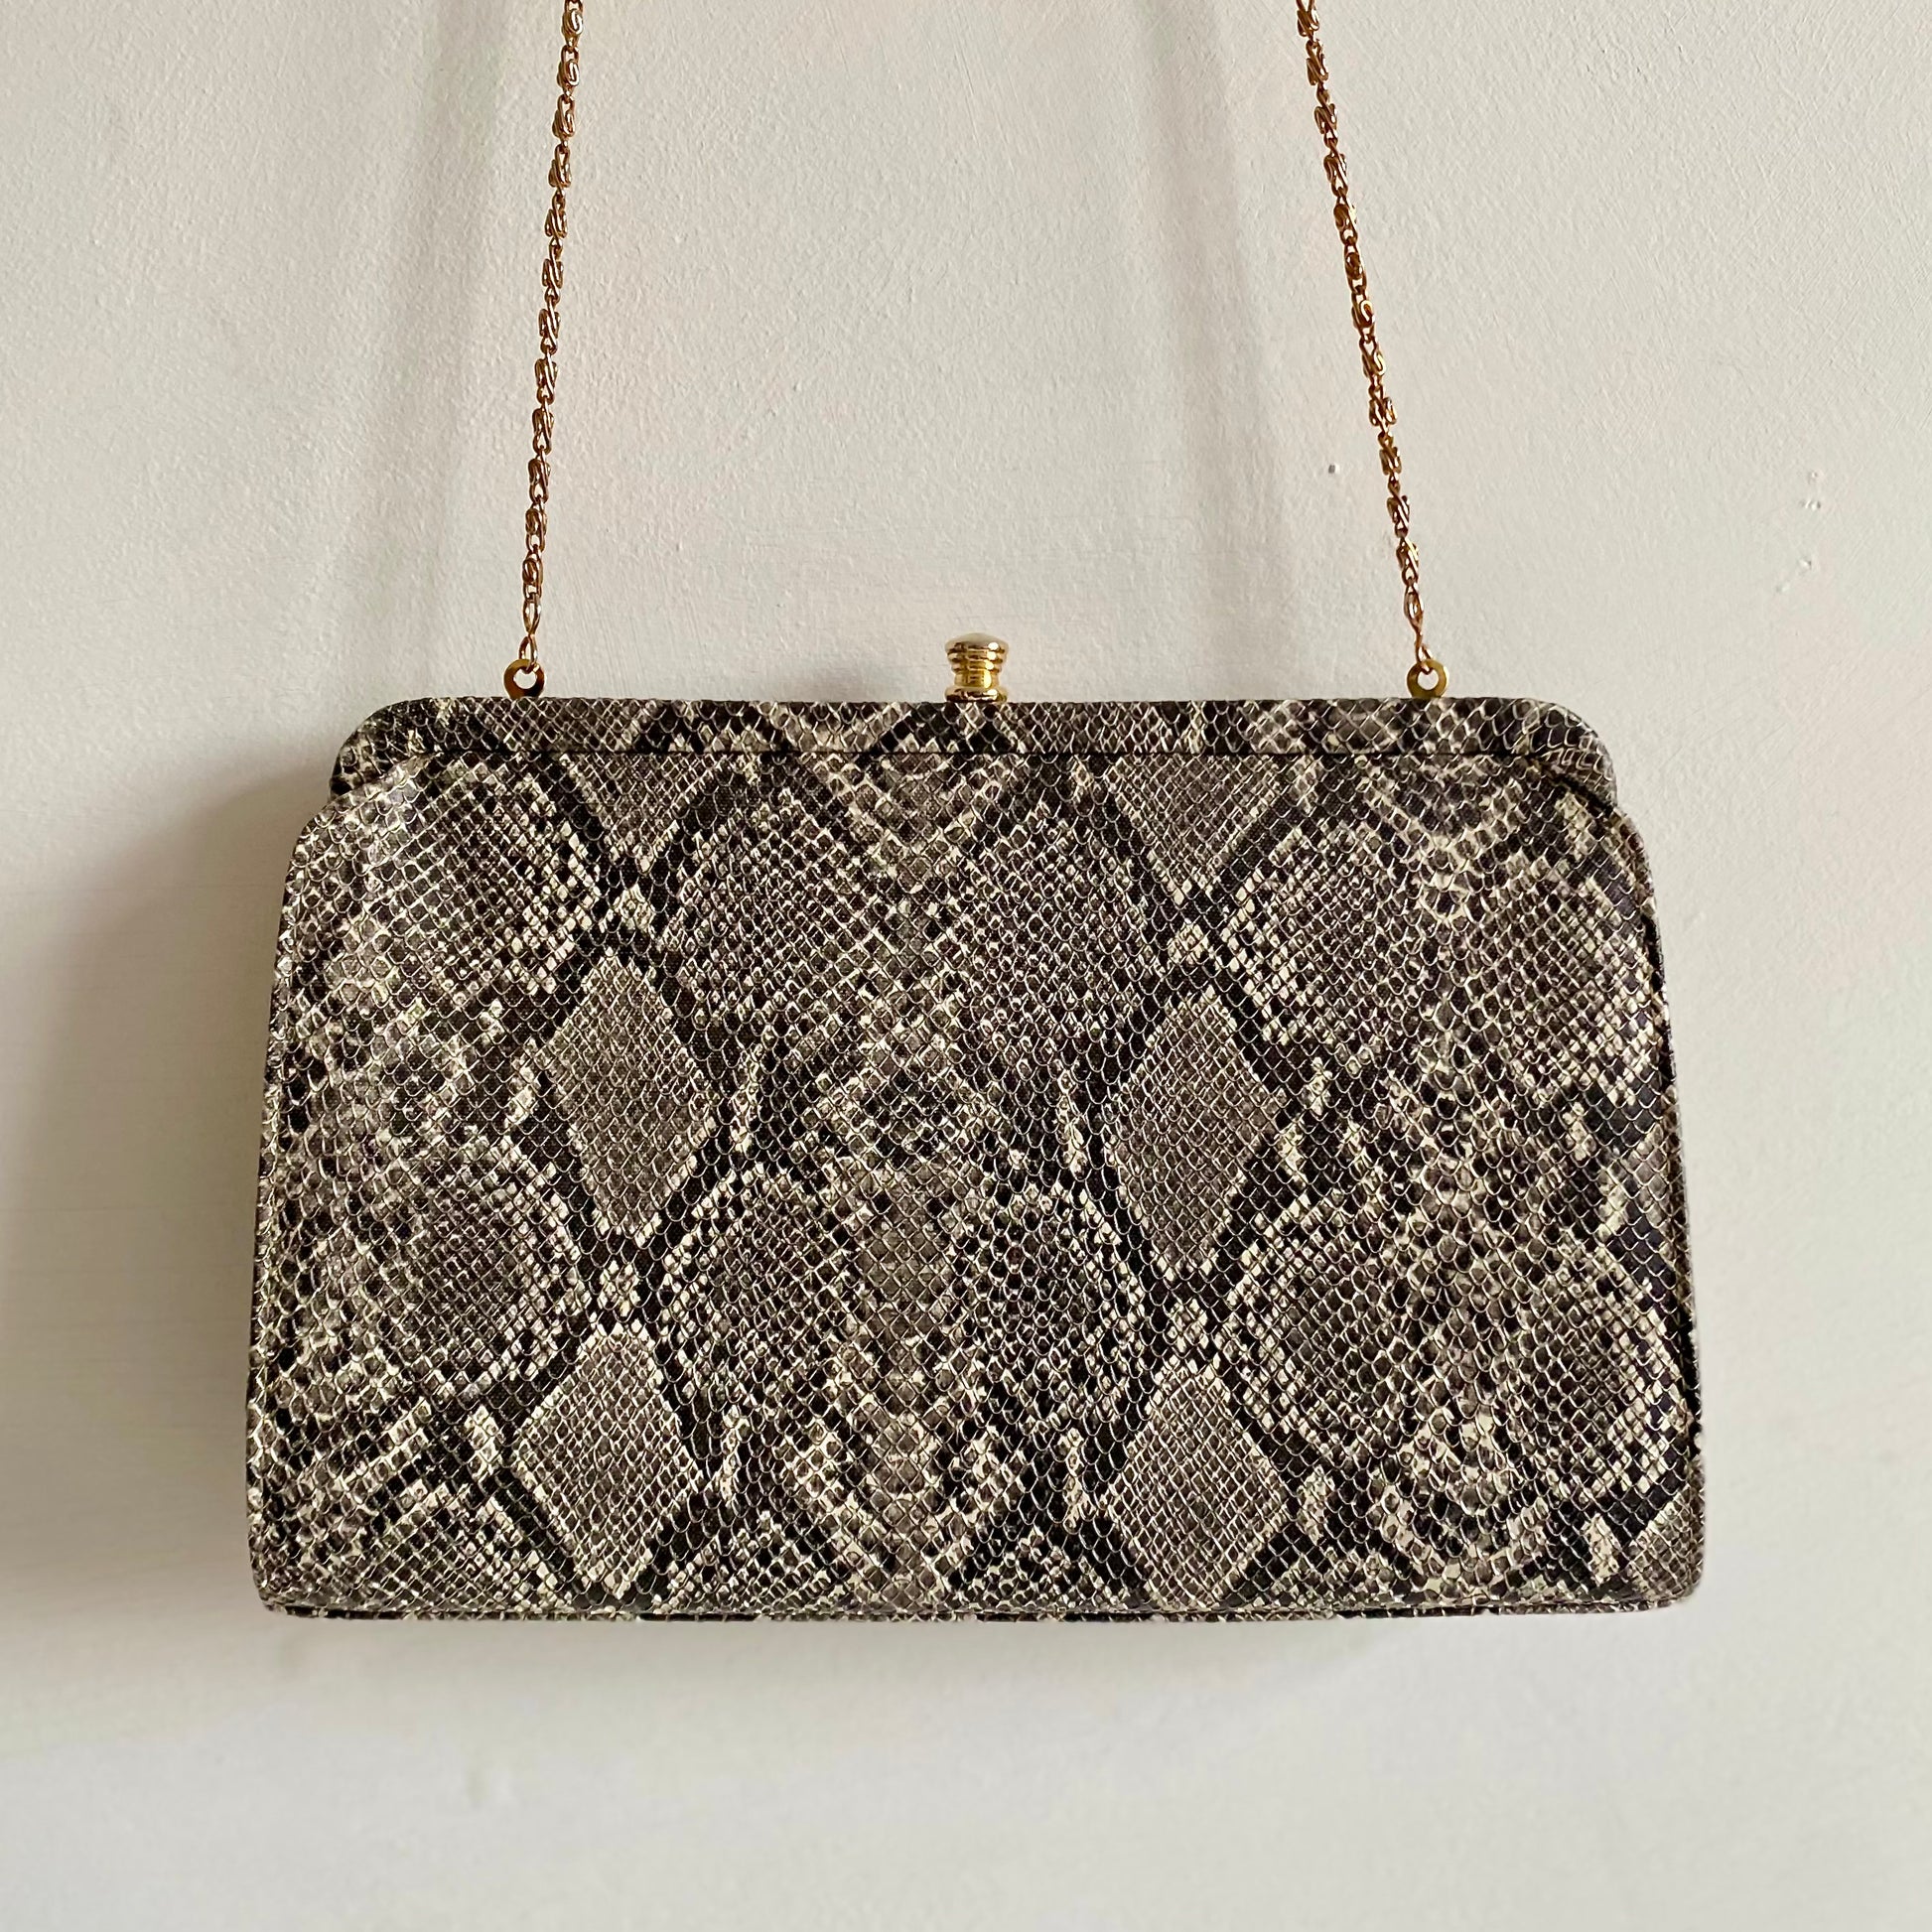 Vintage 80s snakeskin print bag By Japelle Jane Shilton Top clasp closure Fabric lined with internal zip pocket Chain strap (47" length) Wear as shoulder bag or as a clutch 